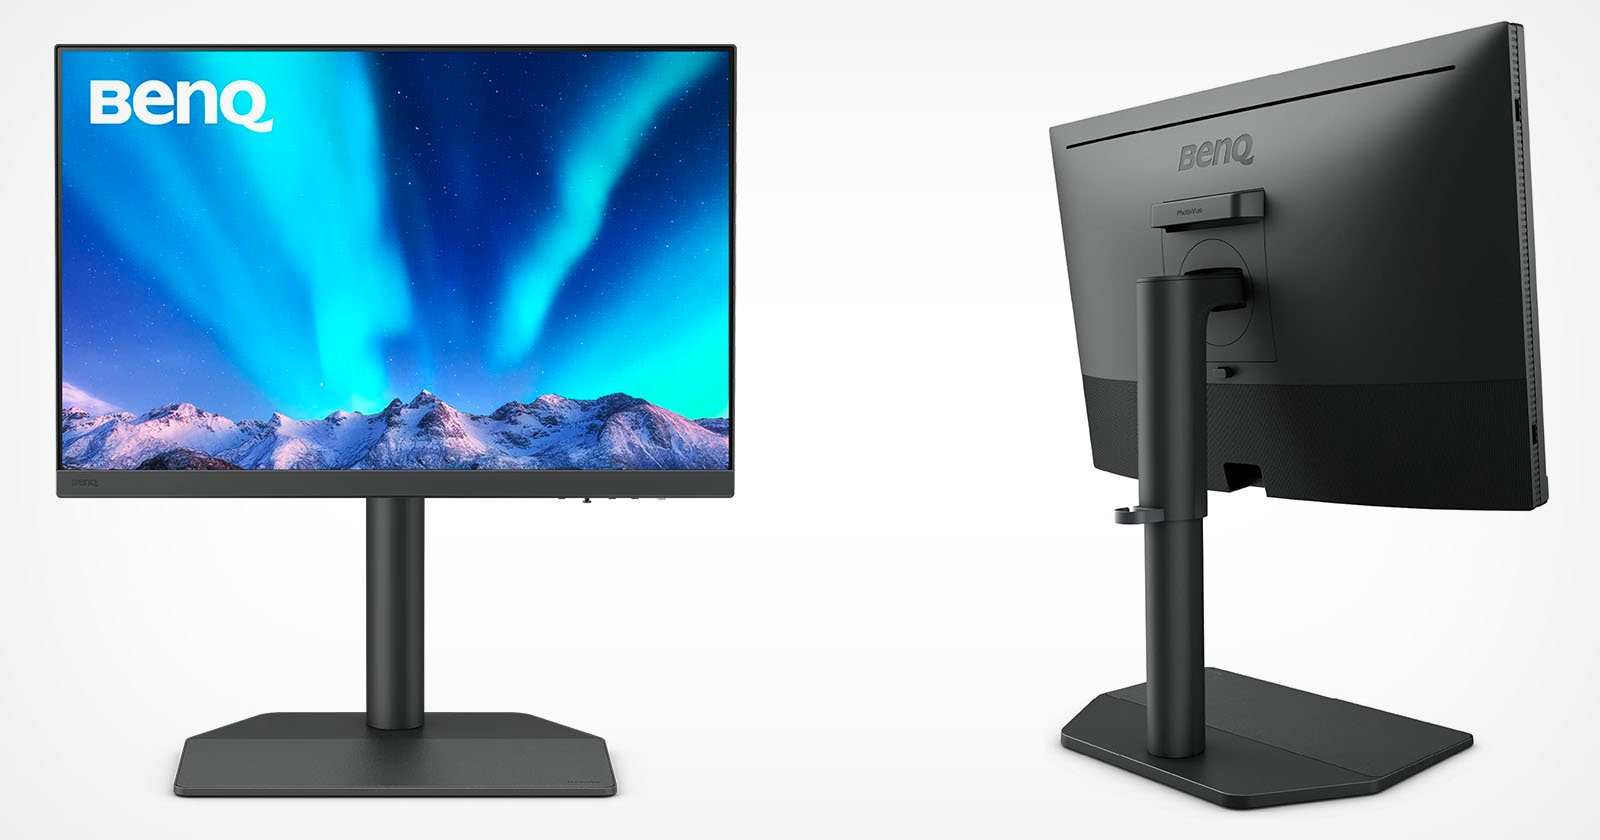 Two views of a benq monitor displaying a vibrant aurora over snowy mountains on the screen, with the front and back perspectives showing the sleek design and adjustable stand.